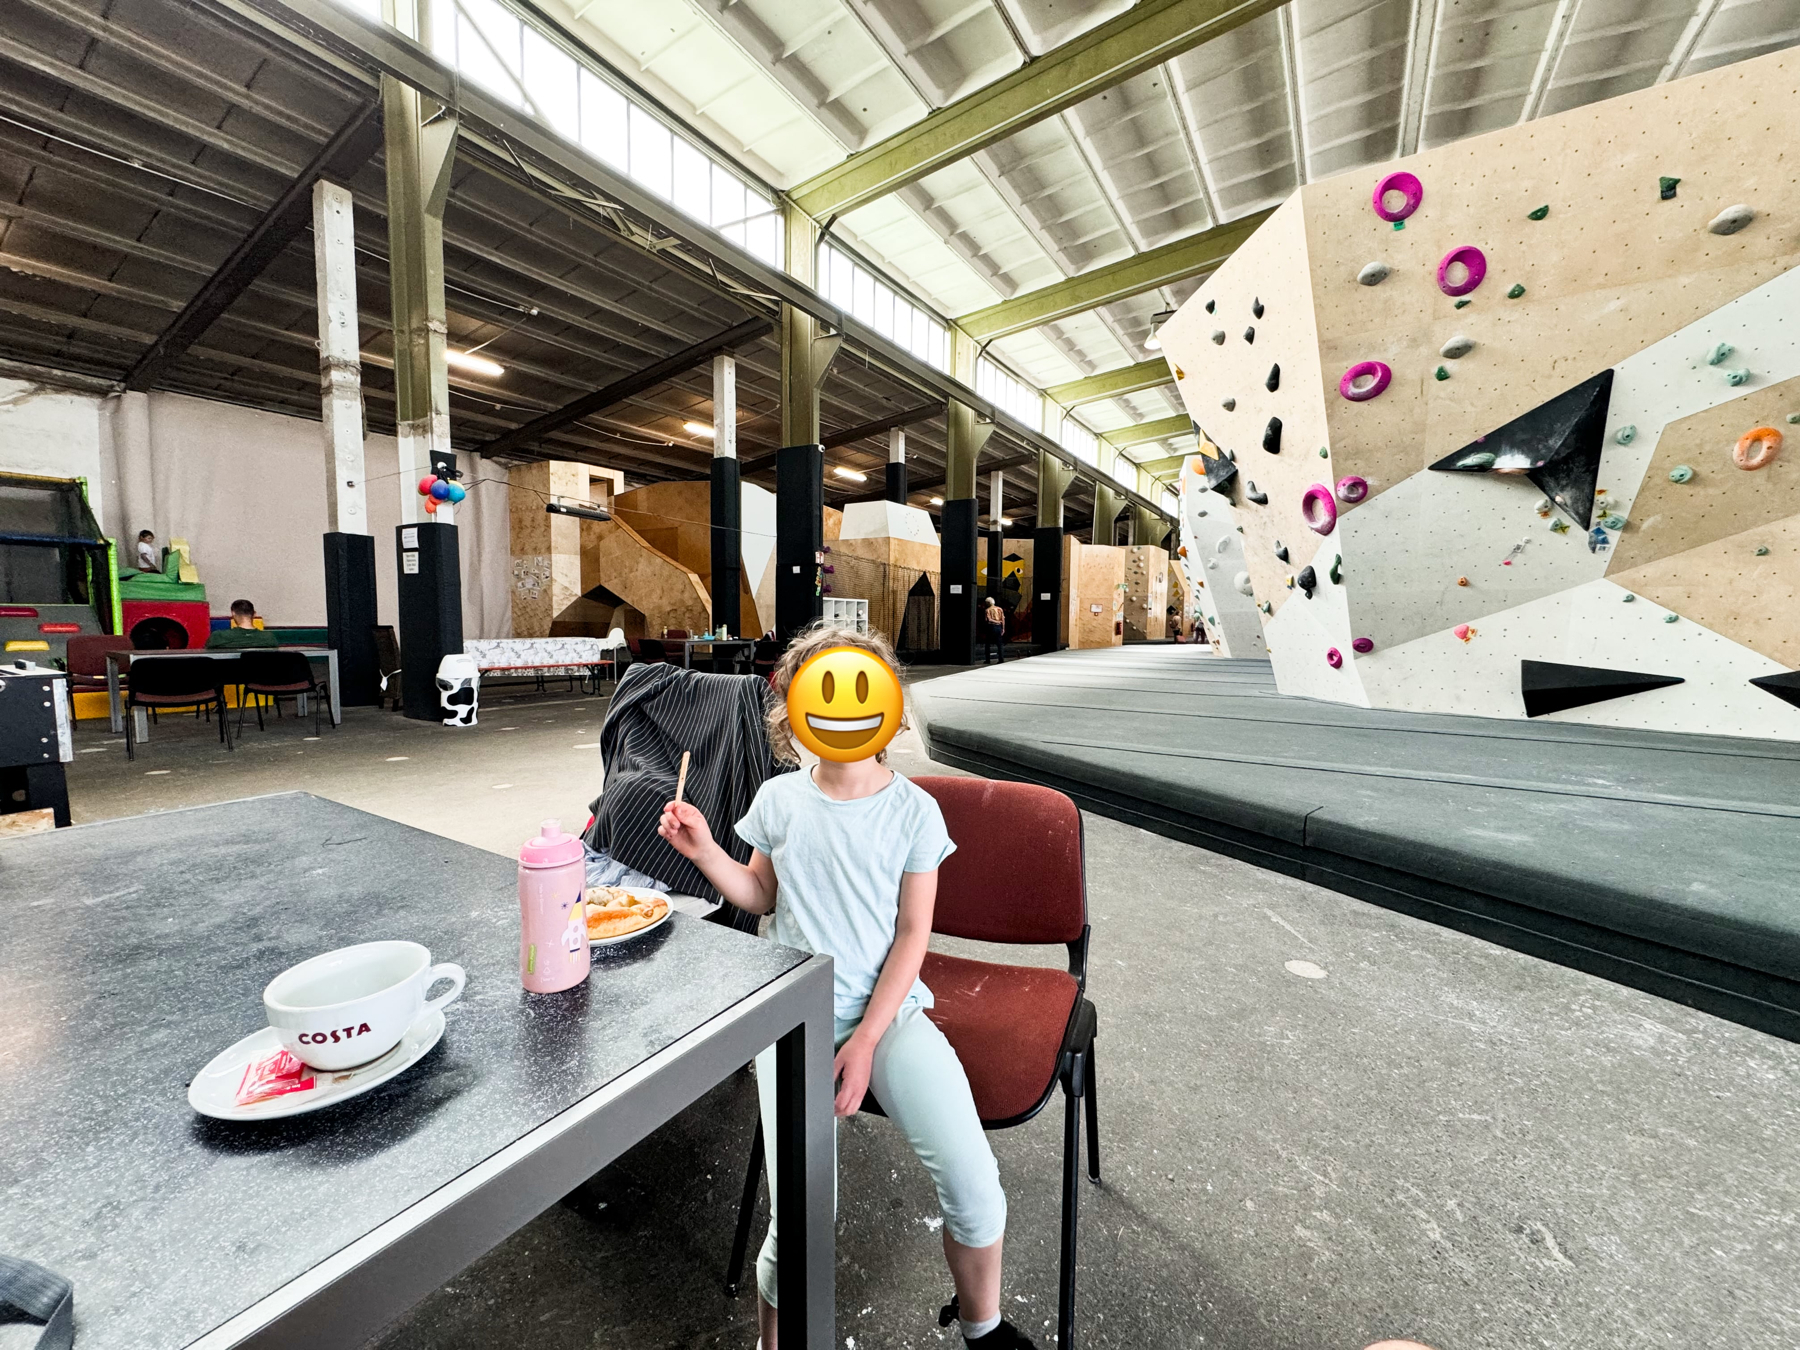 A young child sits at a table in an indoor climbing gym, eating food with a drink bottle and a cup of Costa coffee on the table. The gym features bouldering walls and a children's play area in the background.